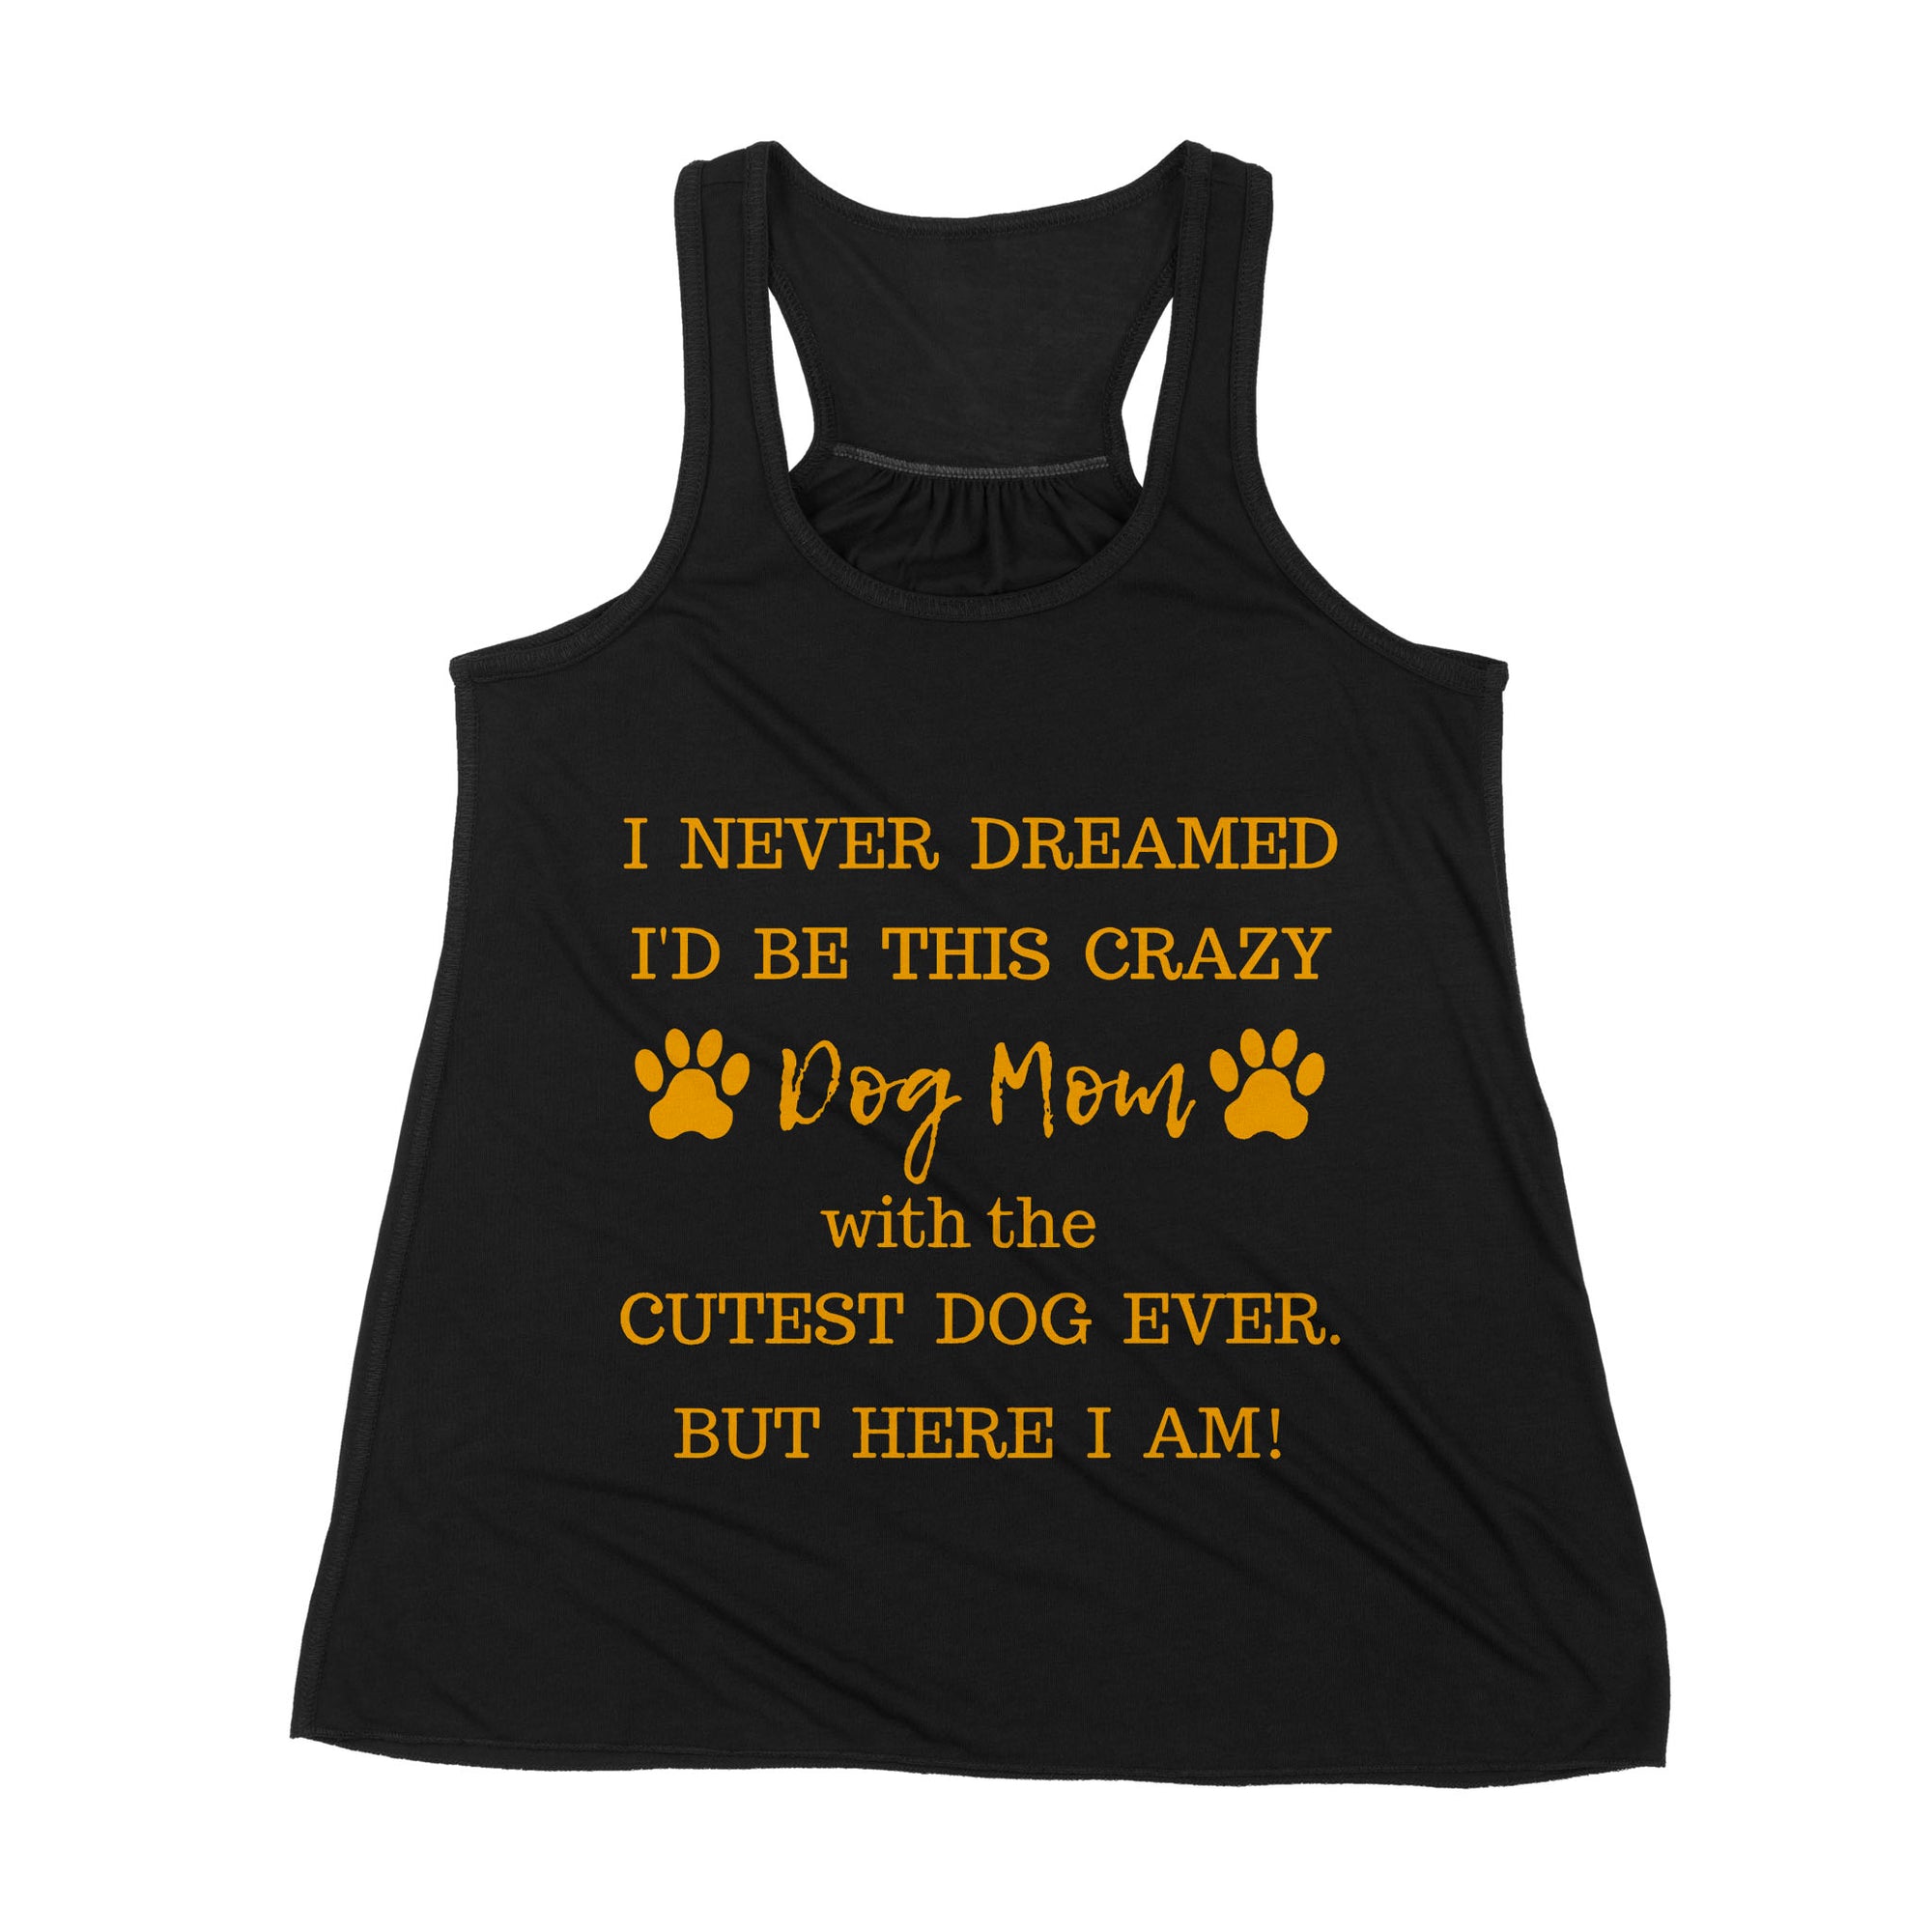 Premium Women's Tank - I Never Dreamed I’d Be This Crazy Dog Mom With The Cutest Dogs Ever